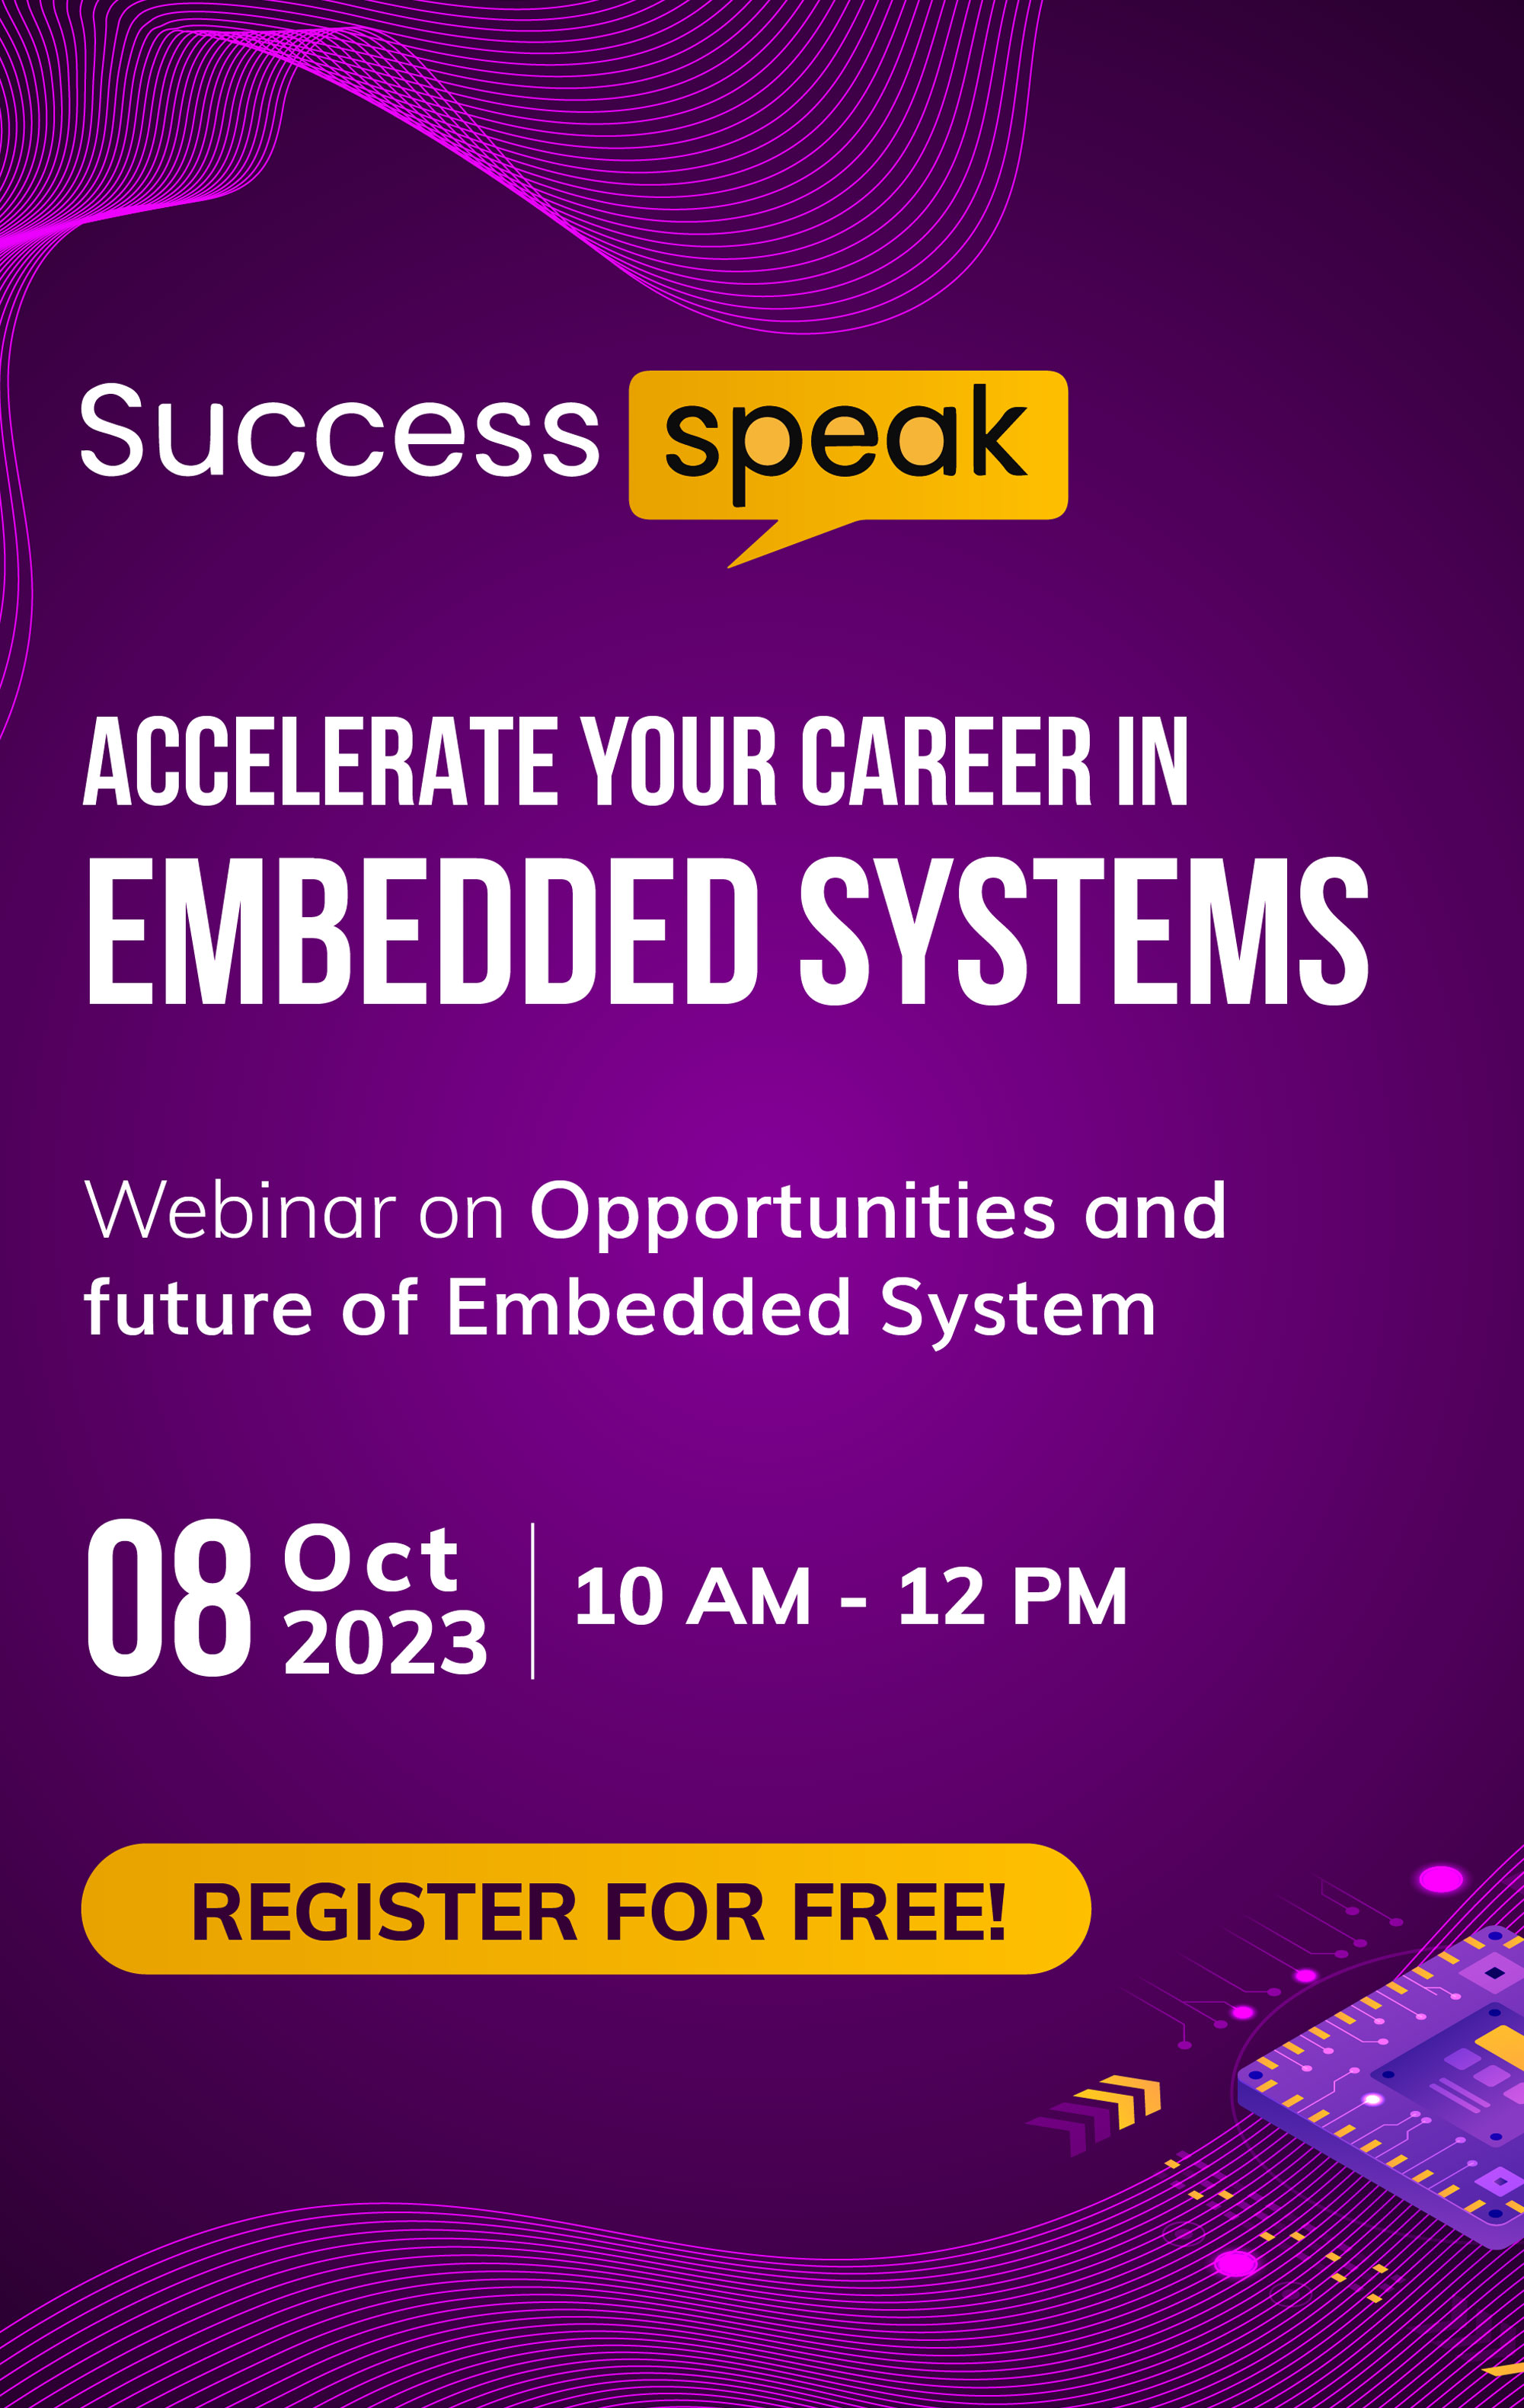 Accelerate Your Career in Embedded Systems